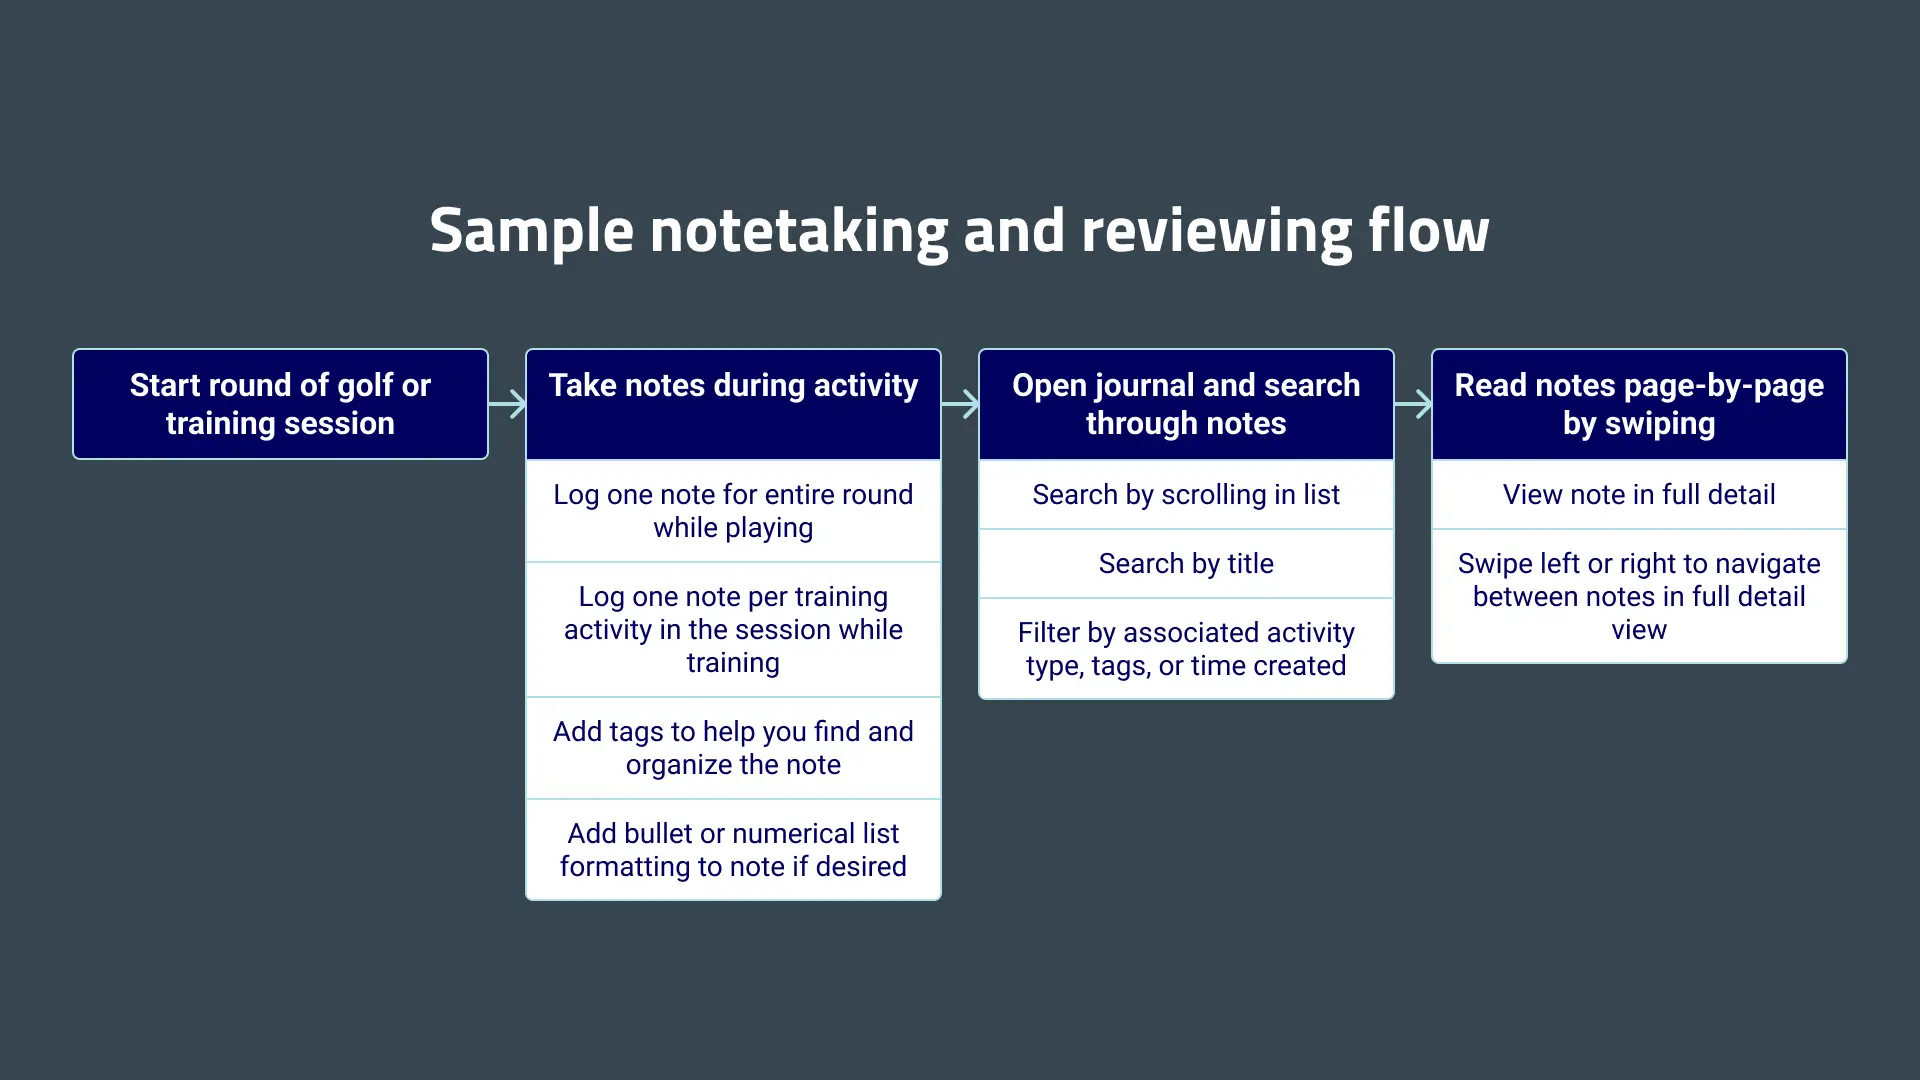 Sample flow for logging and reviewing Golf Journal notes.